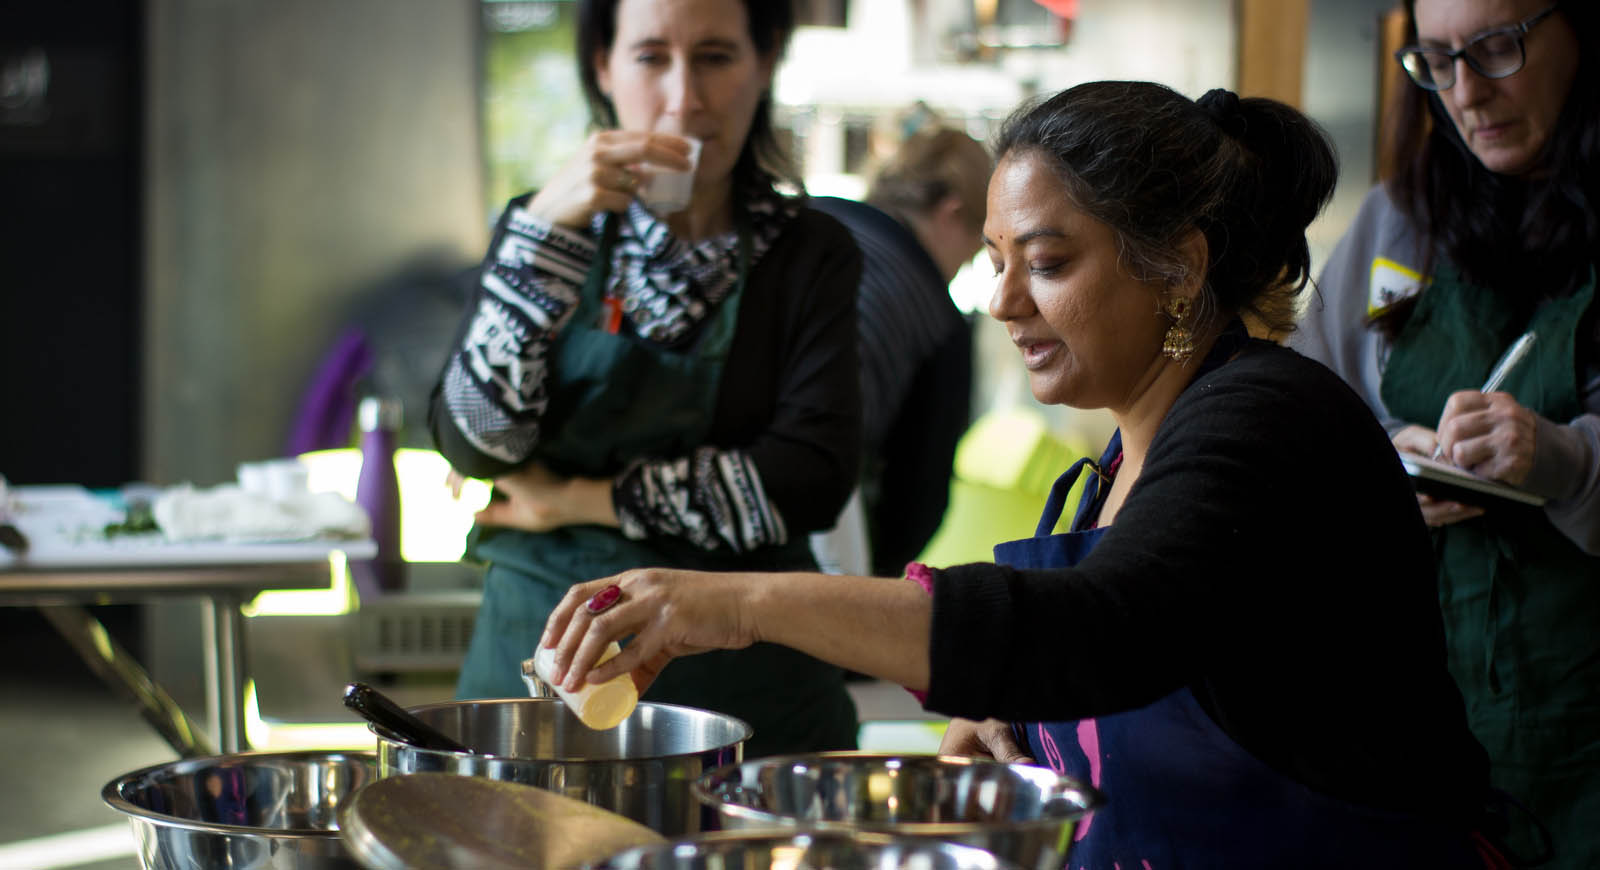 Photo of an Indian woman leading a cooking class, while two women in the background pay attention.